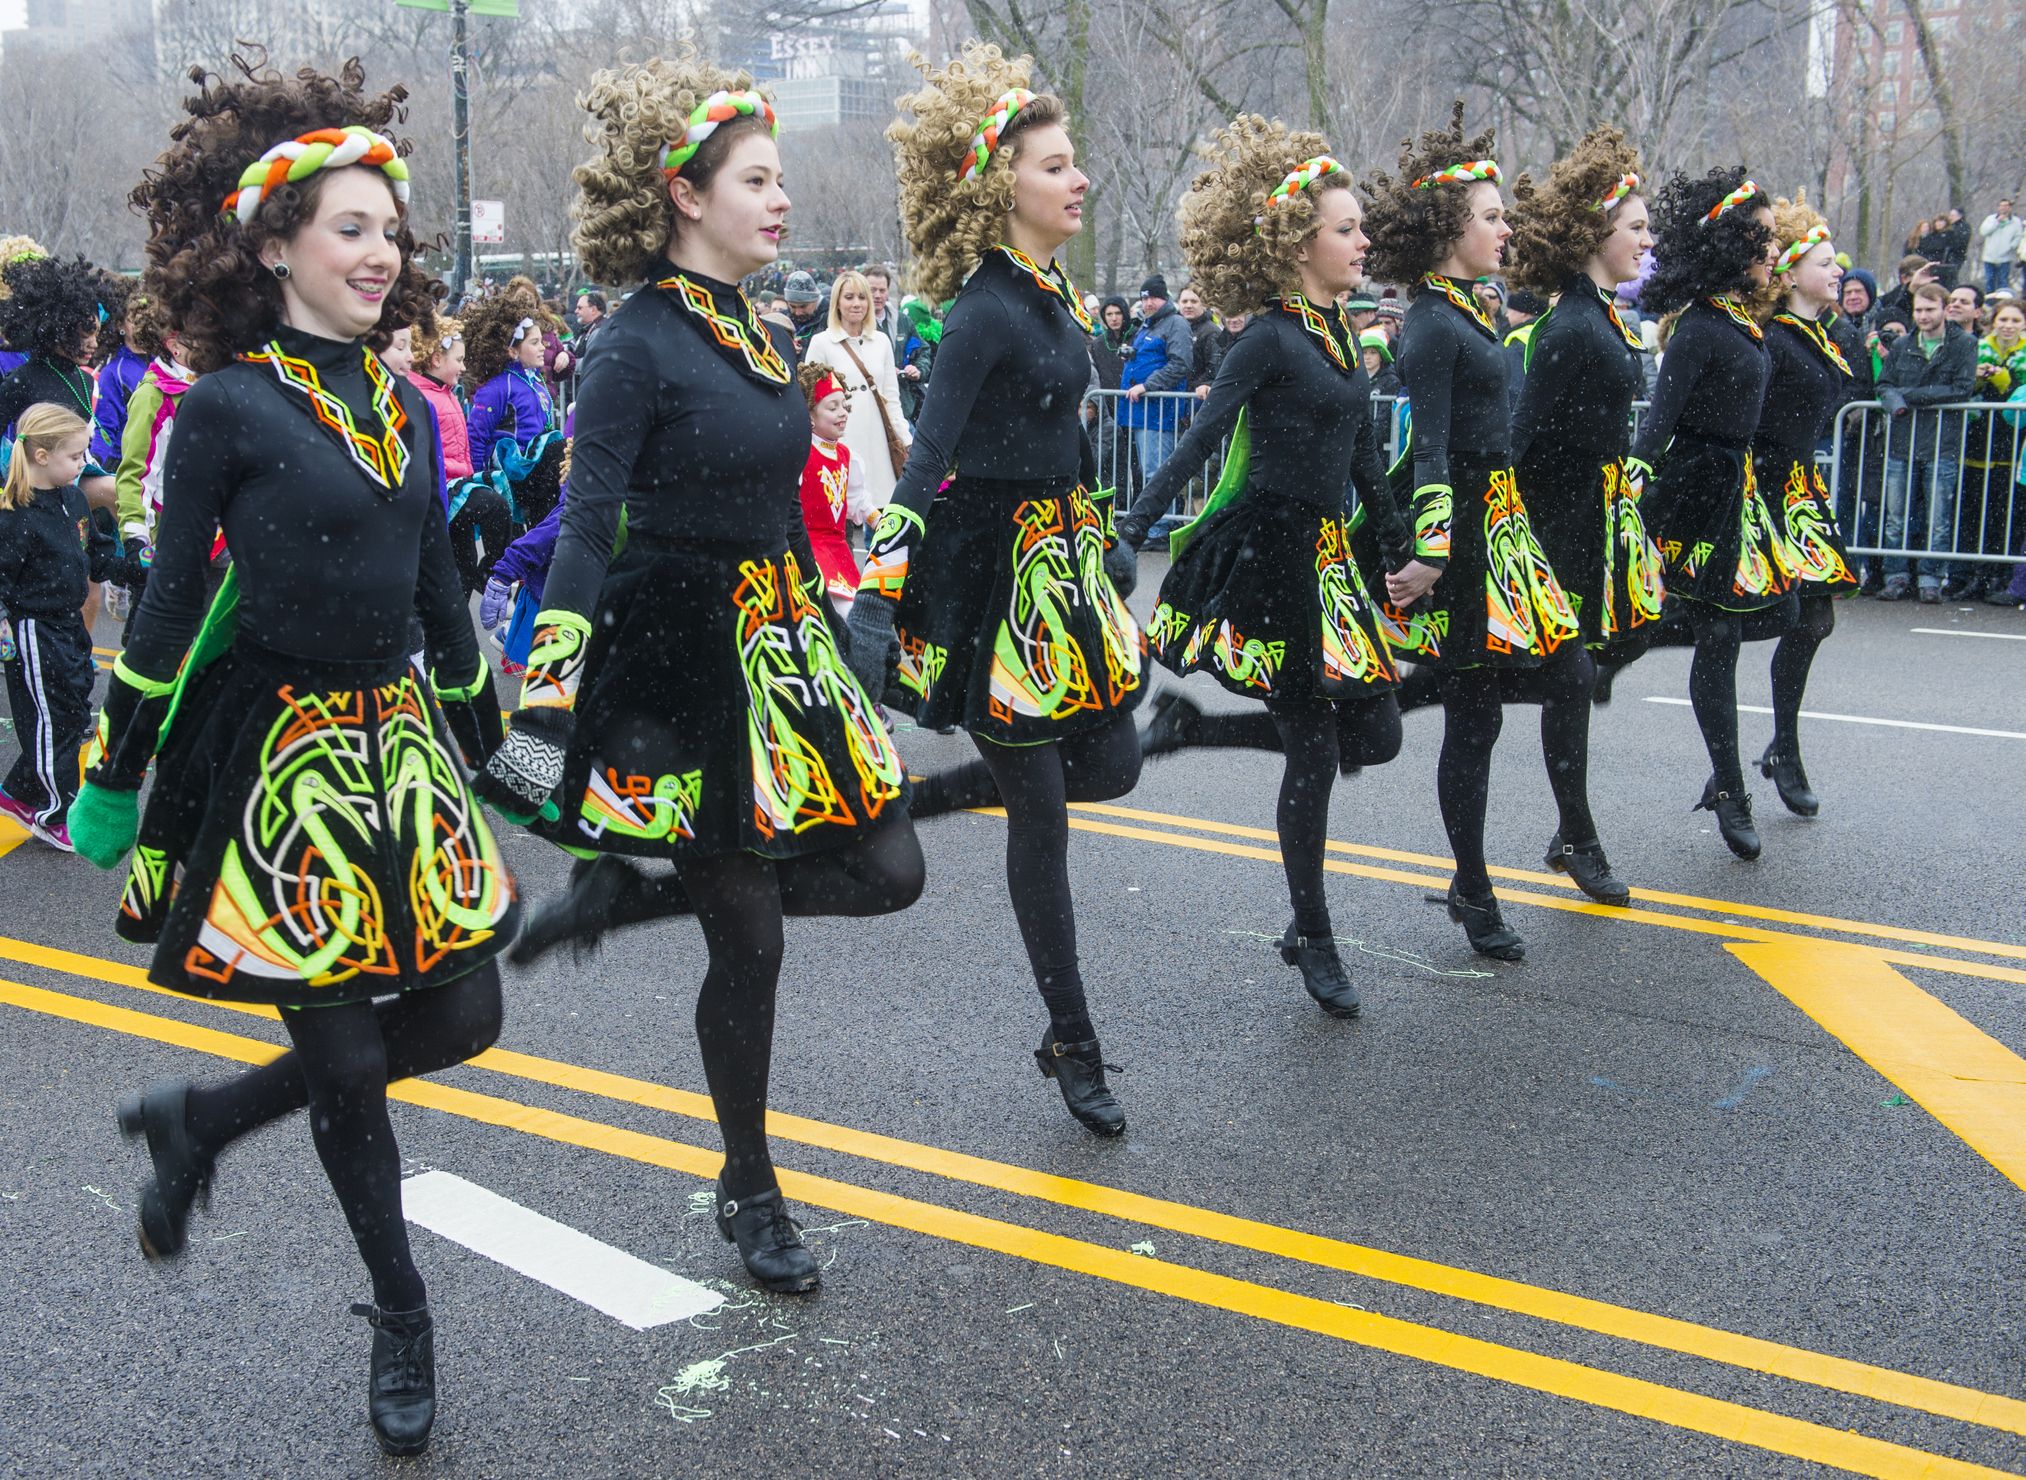 Celebrate St. Patrick's Day today during two downtown parades